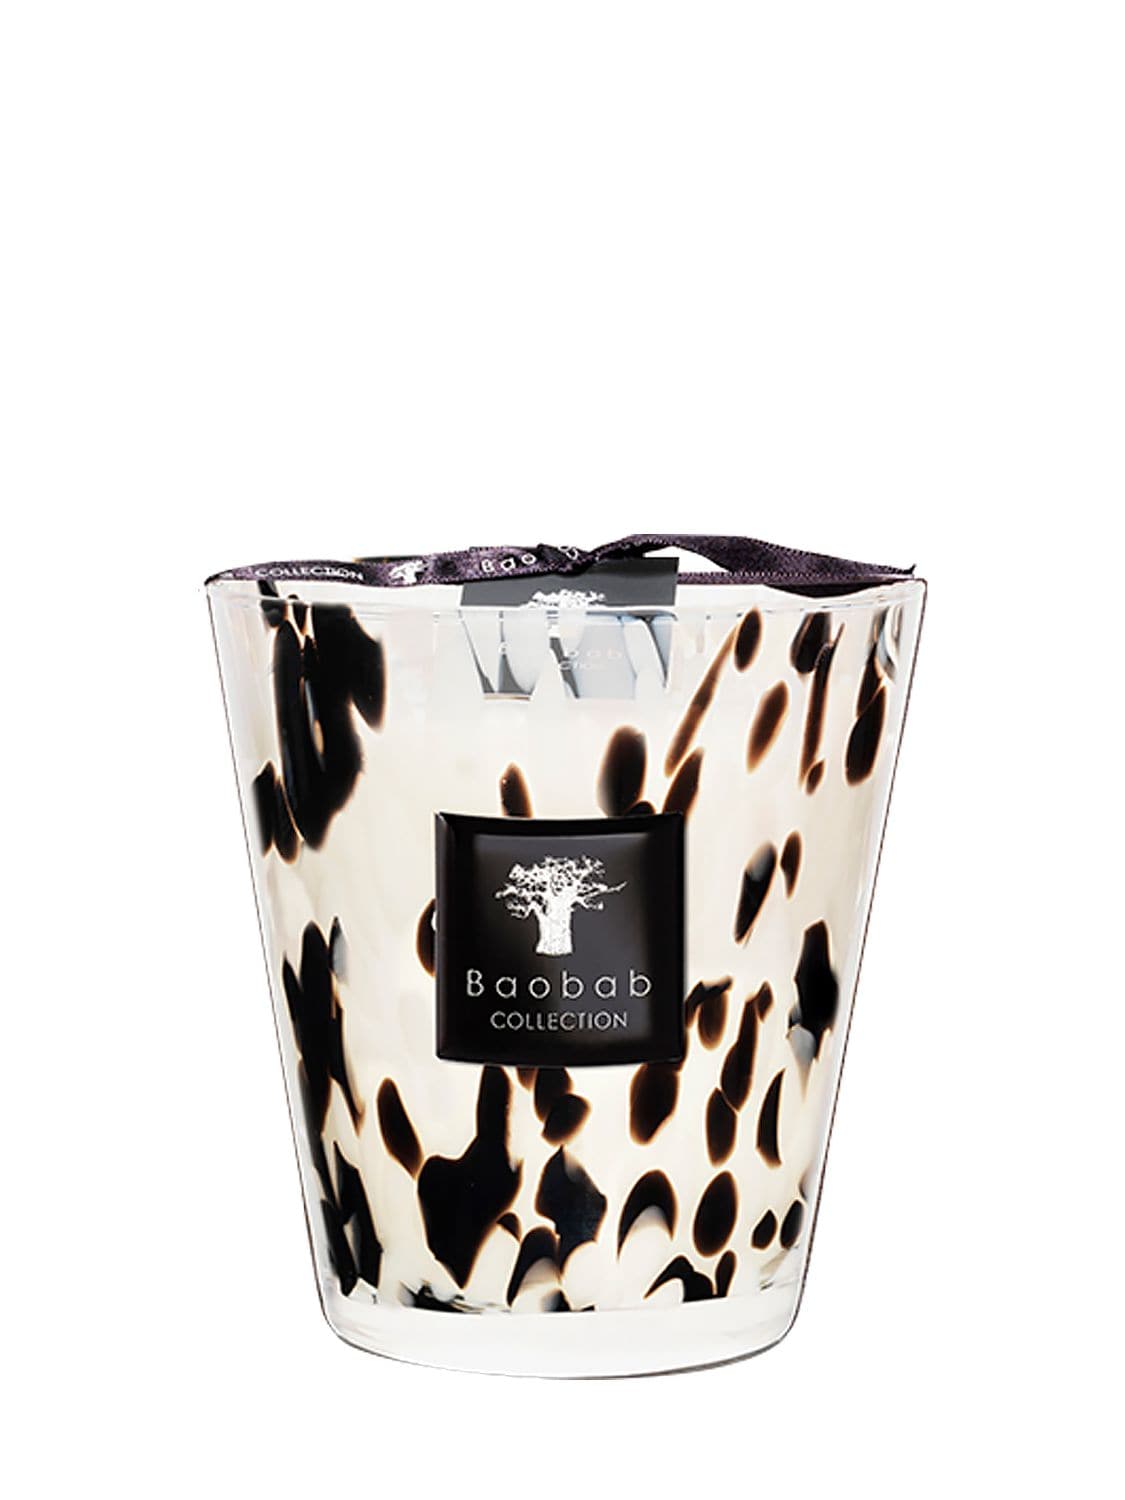 Baobab Collection 1.1kg Black Pearls Candle In Transparent